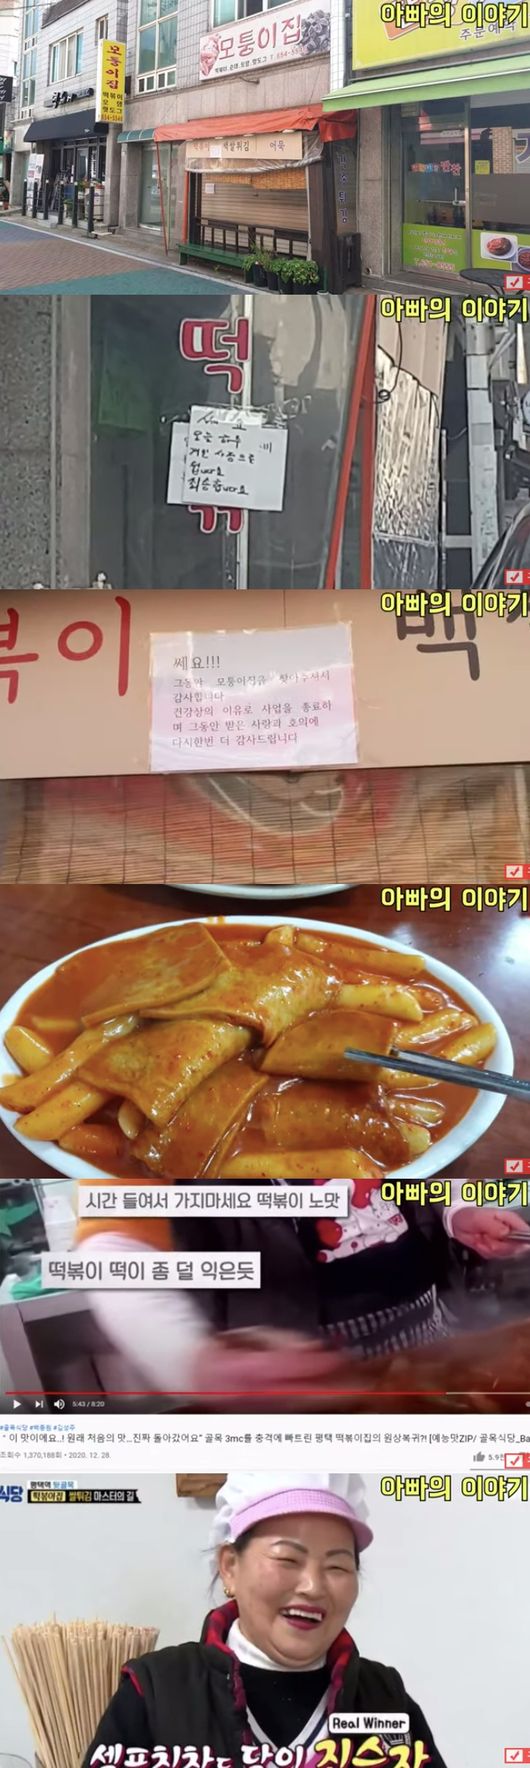 It is known that Pyeongtaeks Tteokbokki house, which received a solution from SBS Baek Jong-wons Alley Restaurant, was closed.On the 18th, YouTube channel Fathers Story, Morthouse Close.A video titled The Ally Restaurant star to The Ally Restaurant Billon, titled Current Status After Second Solution, was posted.The video released shows the exterior of the Tteokbokki house, which is a close shop with the article, Lending Inquiry. In addition, Thank you for finding the corner house during that time.I am grateful again for the love and goodwill I have received while ending my business for health reasons. In the video, Youtuber came to the corner house of Tteokbokki, which was famous for Baek Jong-wons Alley Restaurant, but the corner door was closed.I wanted to know what happened because the store closed several times in the last six or seven.I tried calling and searching the Internet because I dont think I should go to the store while Im resting. The blog also had a review a week ago, but the store was also deleted from Naver Place.The store that I went to was closed like a scene in the video.The store was criticized by netizens for ignoring the recipe of the Baek Jong-won, which was proposed as a solution at the time of the Baek Jong-wons Alley Restaurant inspection, and operating as the original recipe.After receiving the second solution, it was reported that he took a picture with Baek Jong-won and removed the business.The YouTuber said, After the second solution, the taste of tteokbokki improved, but when I saw the lunchtime shop, I could see that it was lost. I think the lost trust could not easily recover.Im worried that your health is not good, but its a shame that the store has disappeared, he added.Fathers Story Baek Jong-wons Alley Restorant YouTube Capture